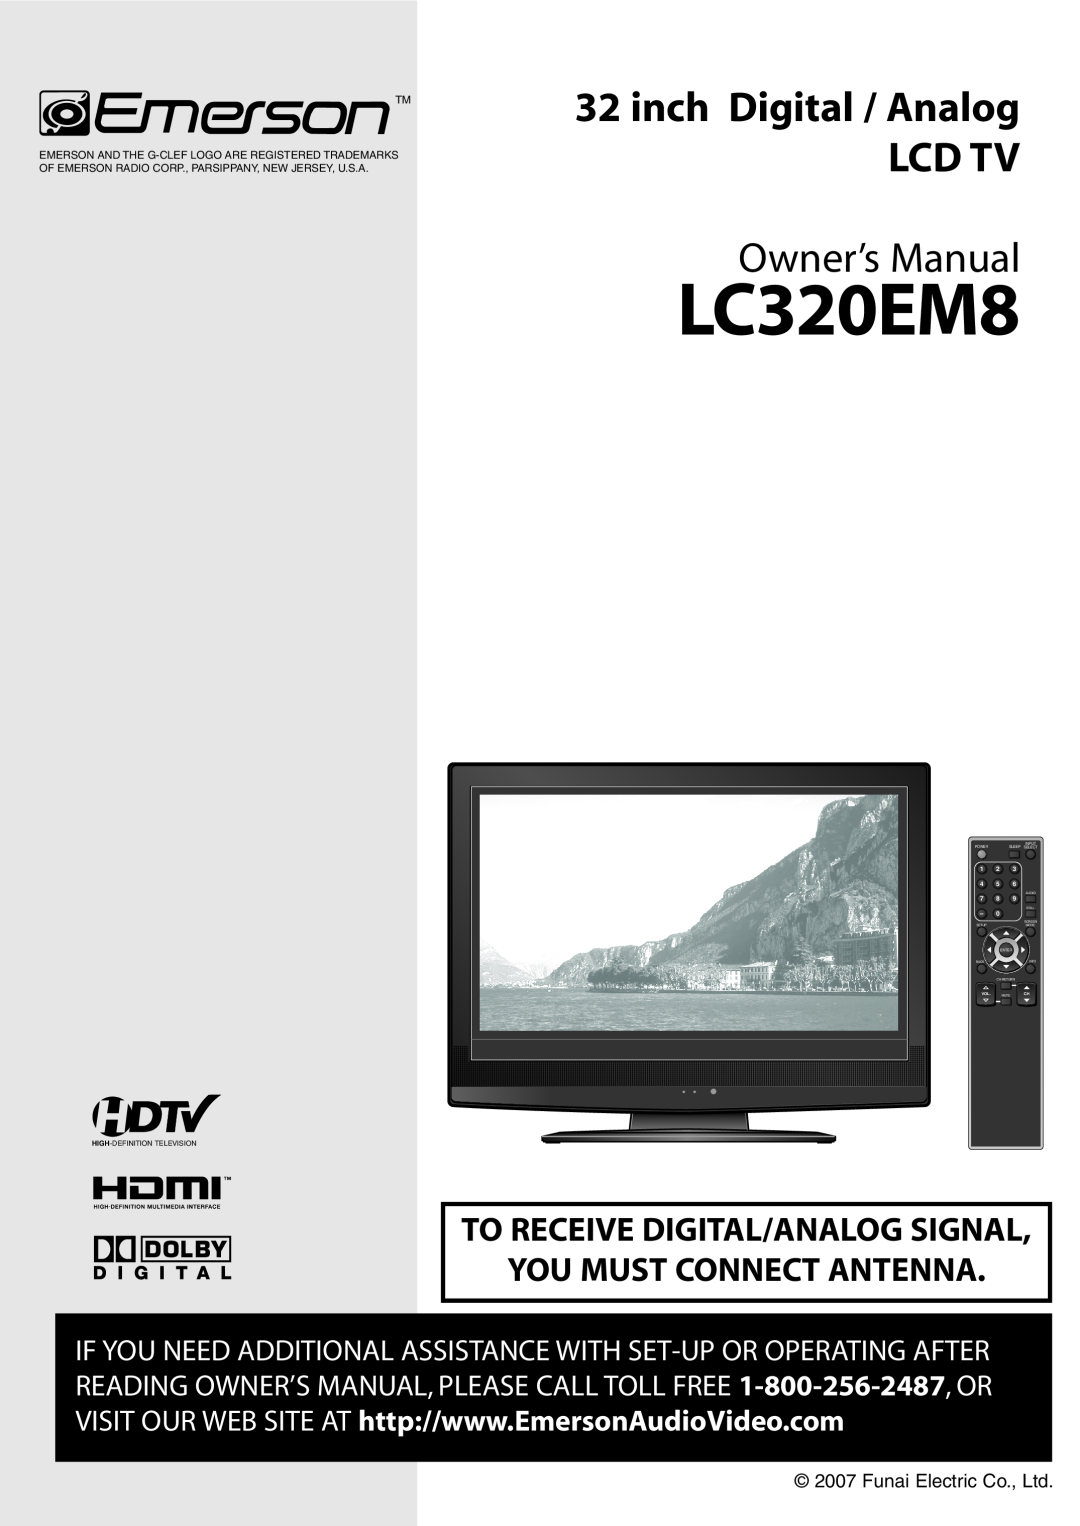 Emerson LC320EM8 owner manual inch Digital / Analog LCD TV, Owner’s Manual, Power, Input, Sleep Select, Audio, Still, Back 